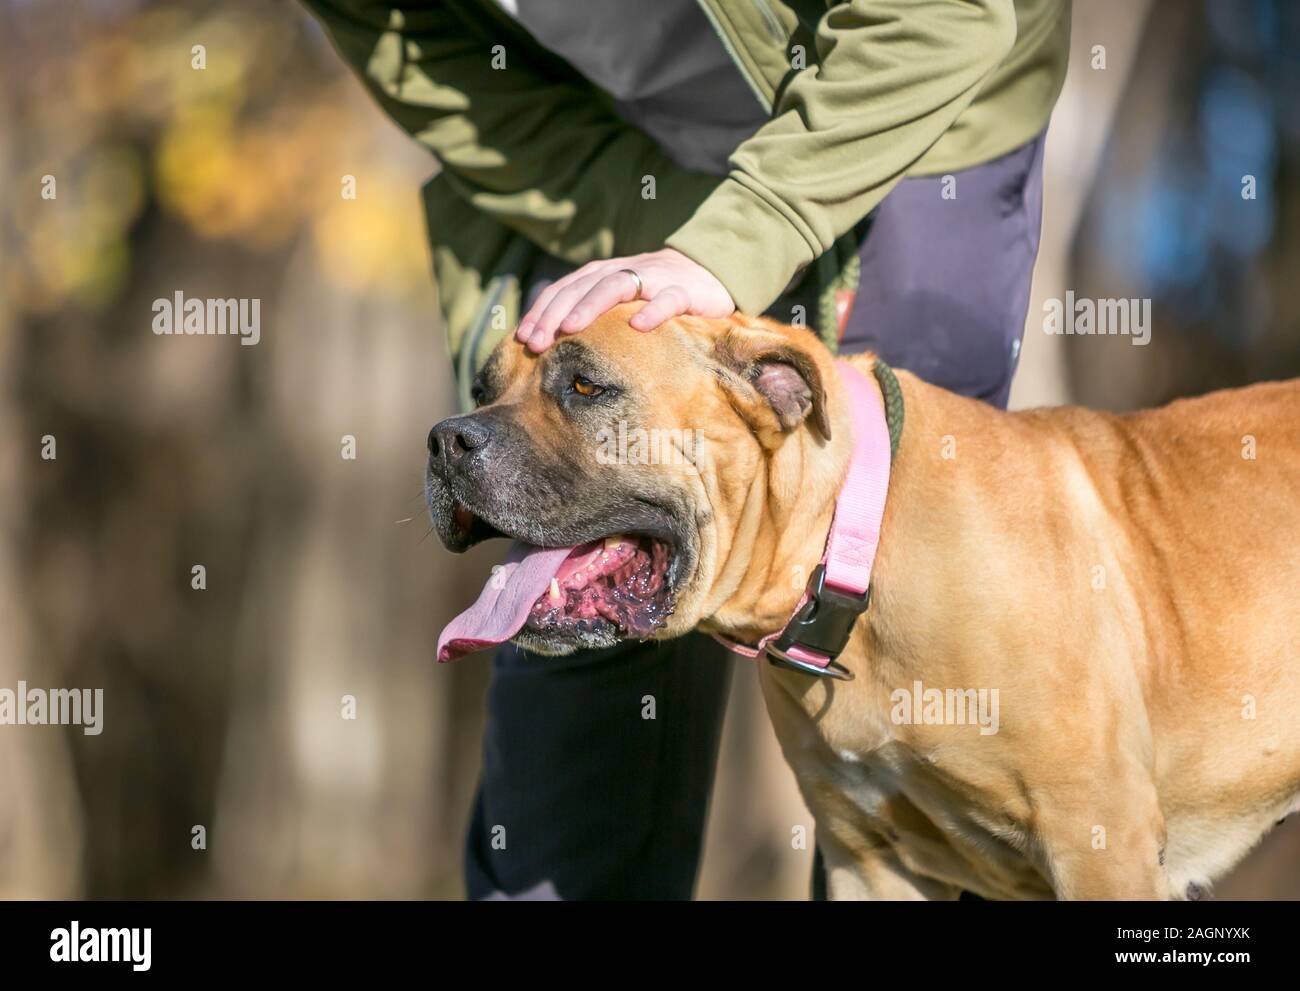 A person petting a brown Mastiff dog on its head Stock Photo